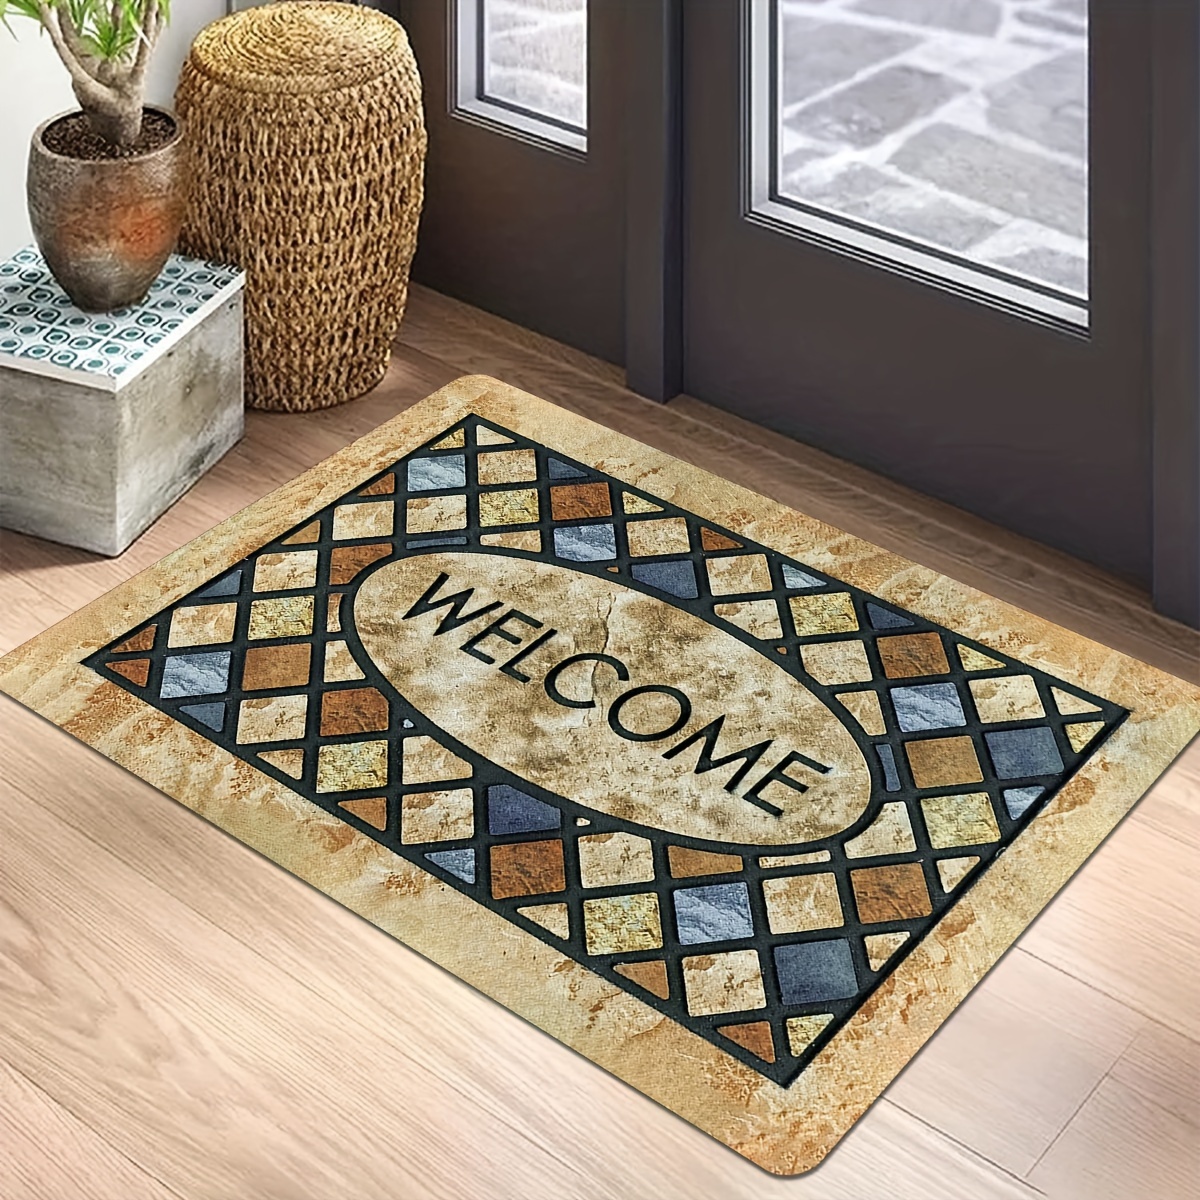 Home & Living :: Home Decor :: Rugs & Door Mats :: Multi-Colored